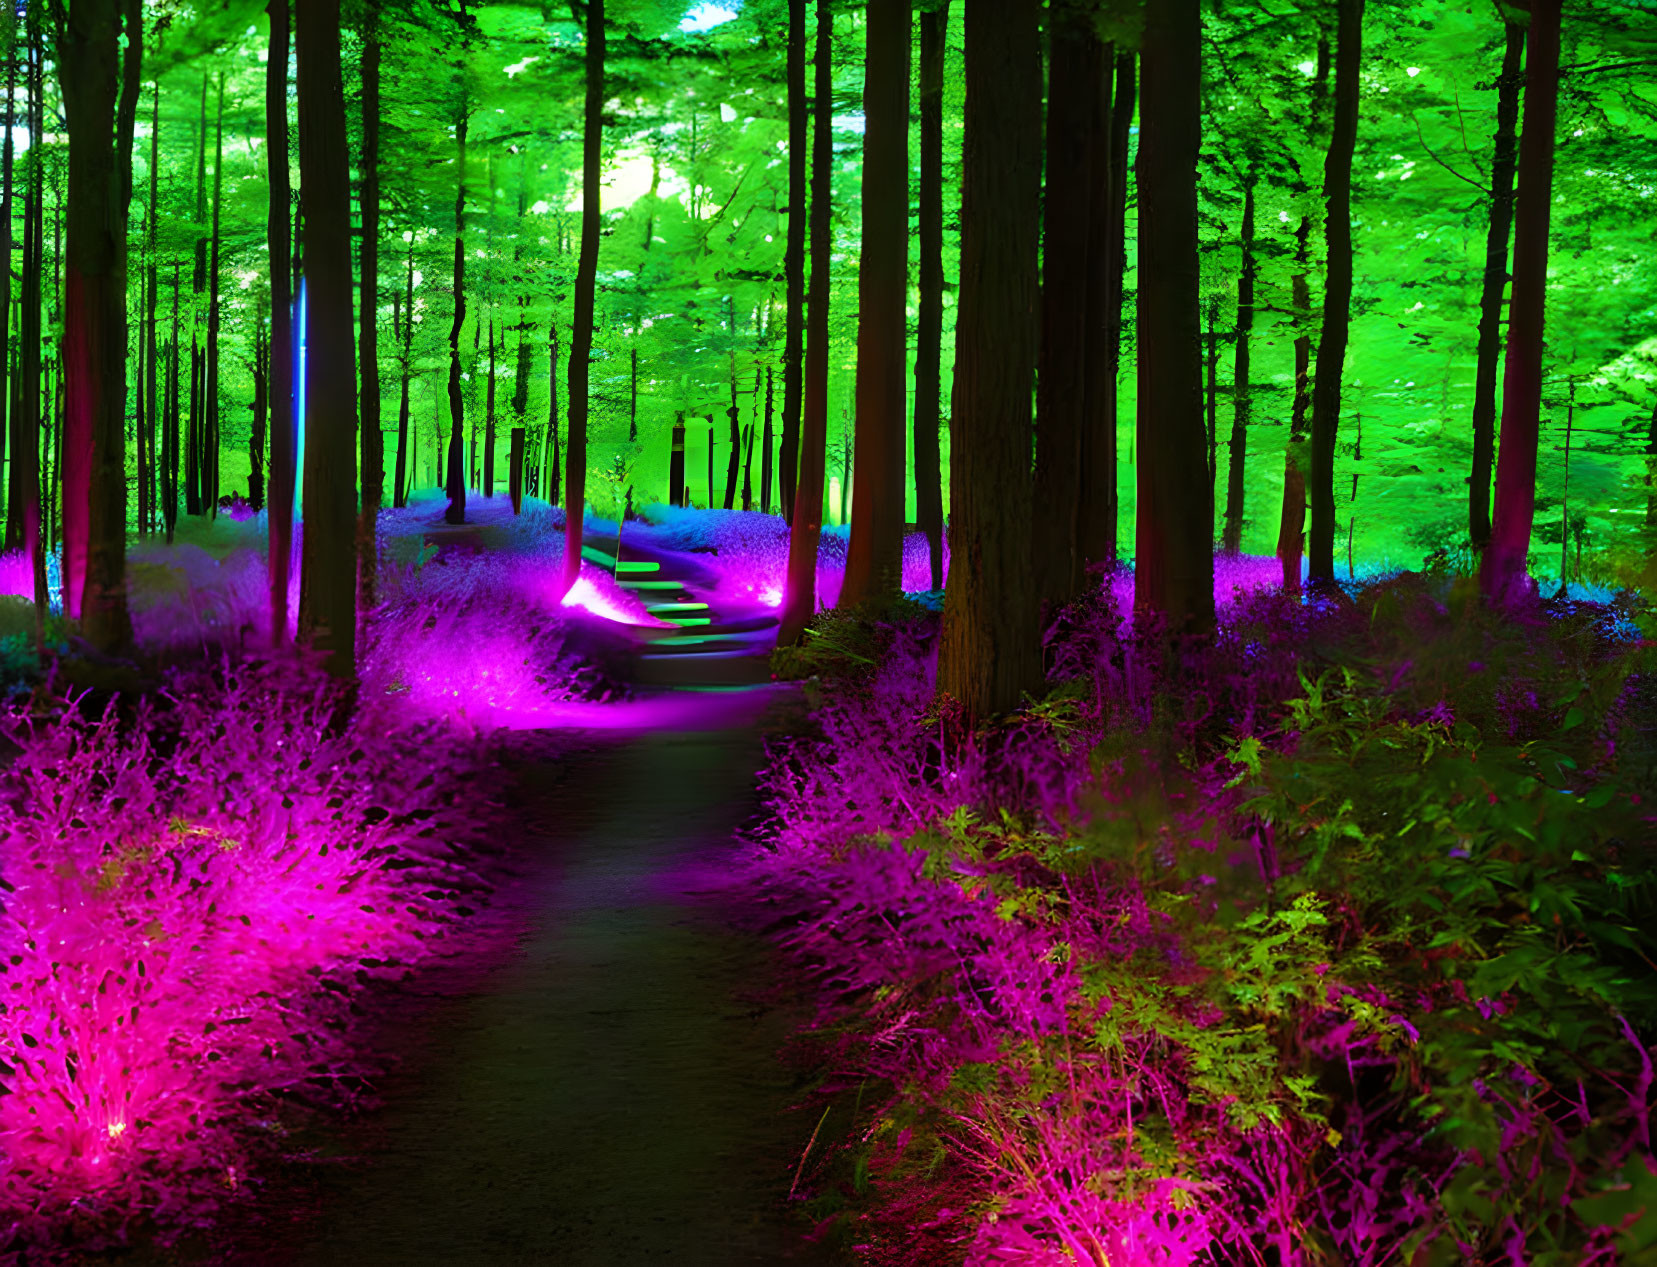 Enchanted forest path with purple and green lights